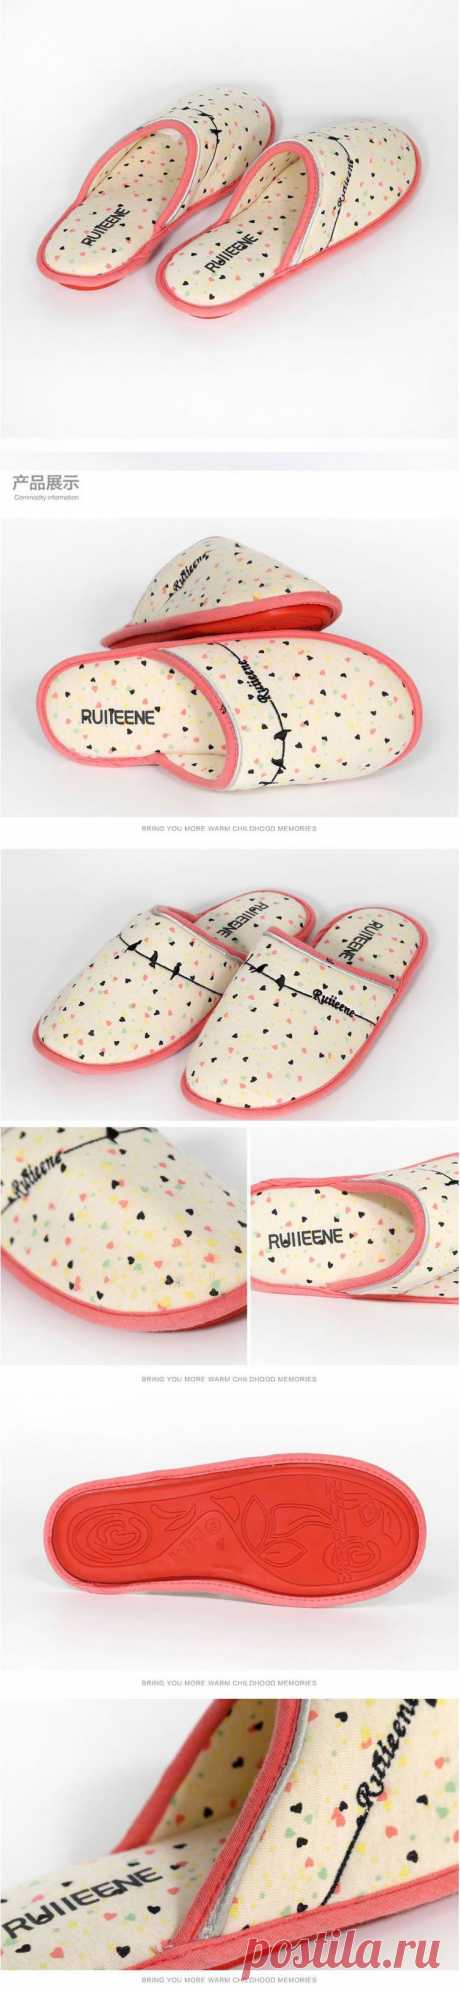 Aliexpress.com : Buy Nice to meet you.2015 winter women slippers lover unisex fashion warm cow muscle at Home Slippers Indoor Shoes men slippers from Reliable shoes brads suppliers on The perfect pair | Alibaba Group